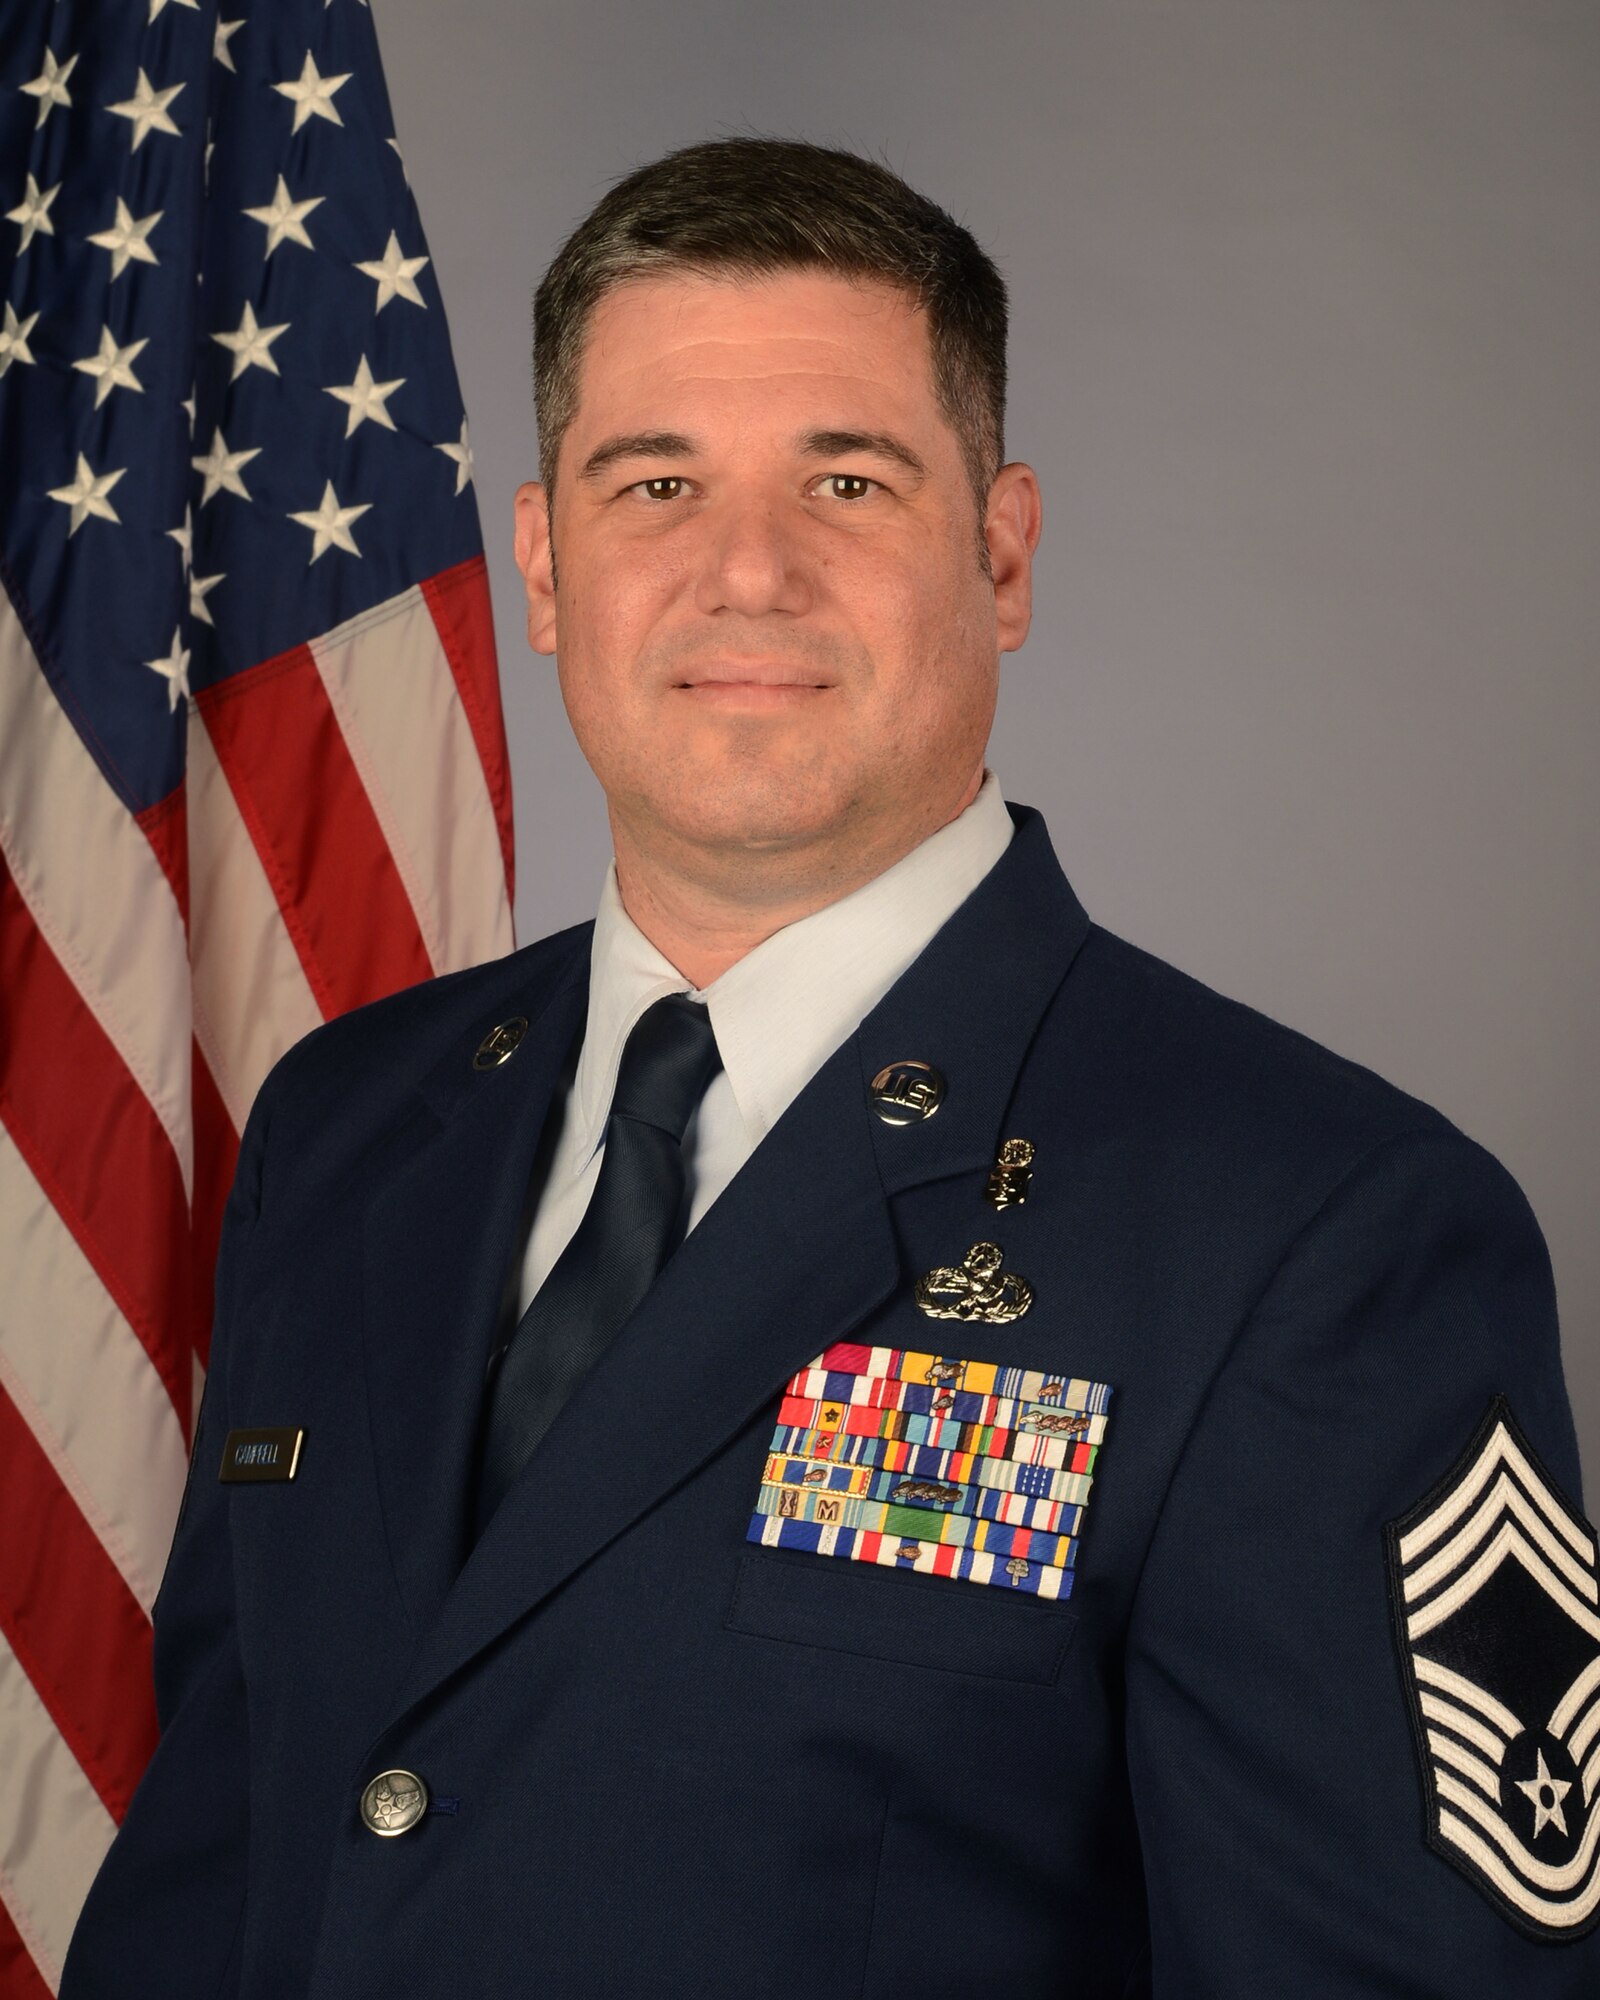 U.S. Air Force Chief Master Sgt. Durham Campbell, 169th Medical Group superintendent, August 5, 2021 at McEntire Joint National Guard Base, South Carolina. (U.S. Air National Guard photo by Senior Master Sgt. Edward Snyder, 169th Fighter Wing Public Affairs)